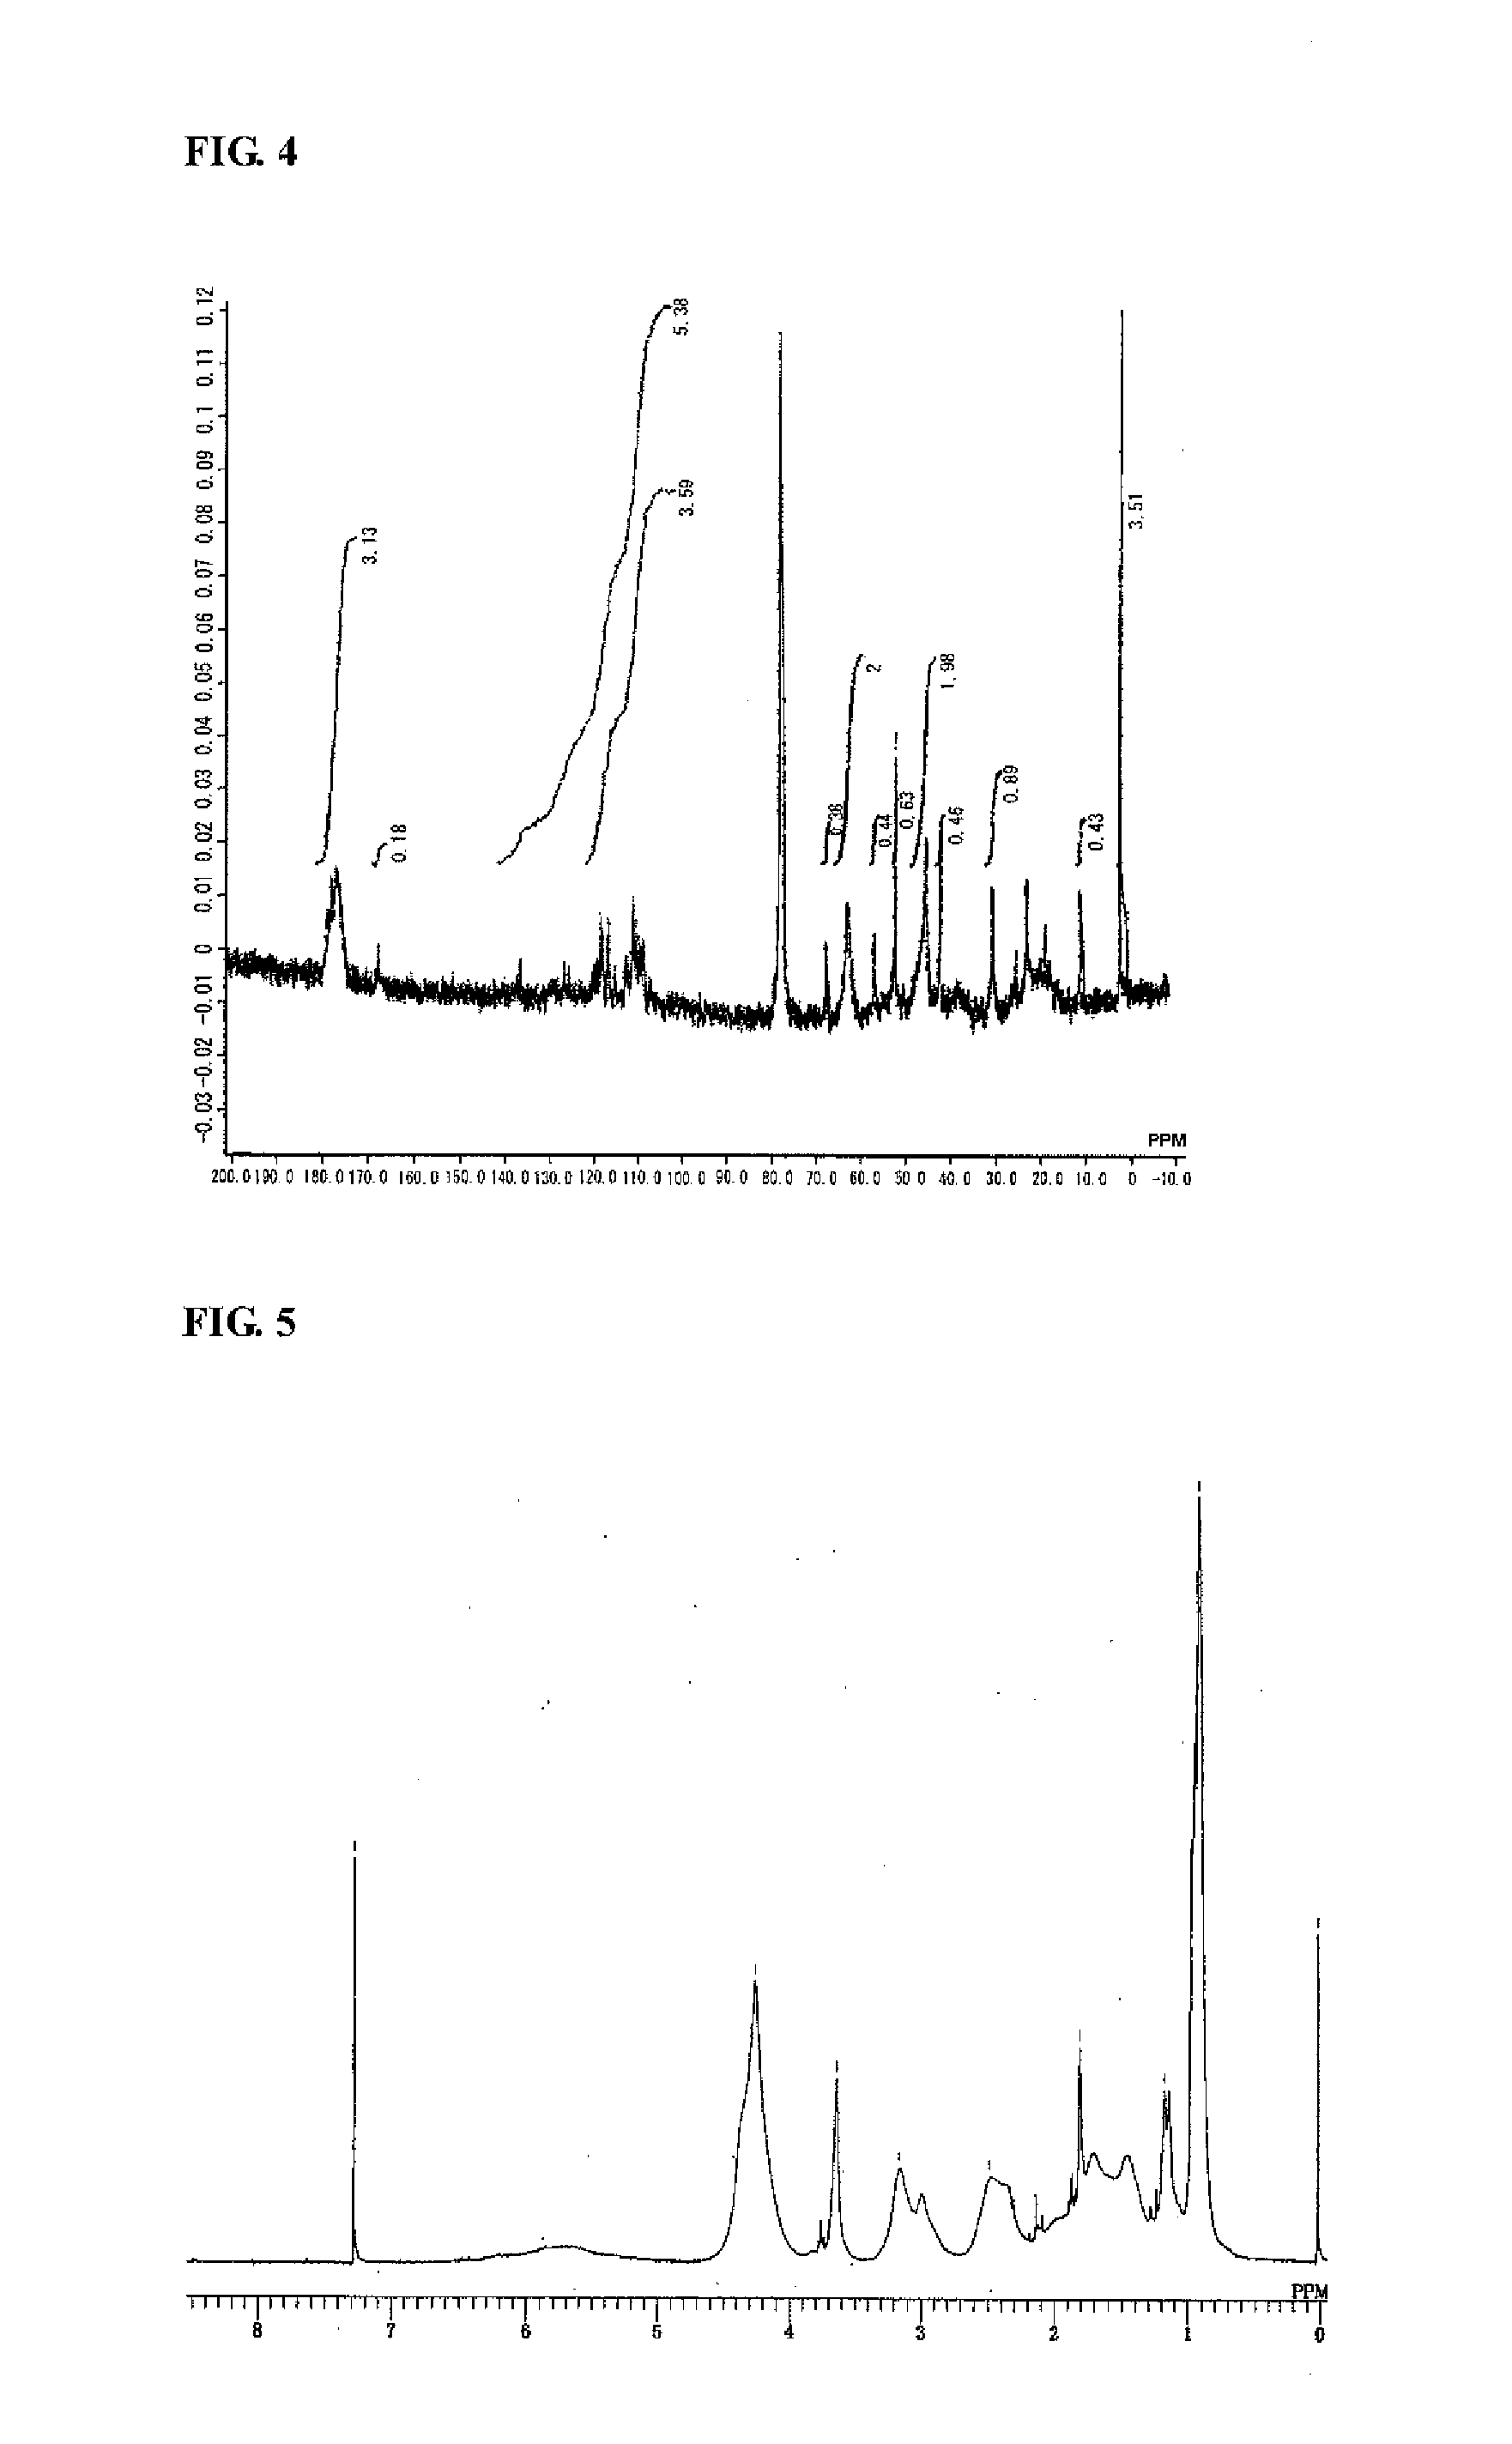 Curable composition for coating containing fluorine-containing highly branched polymer